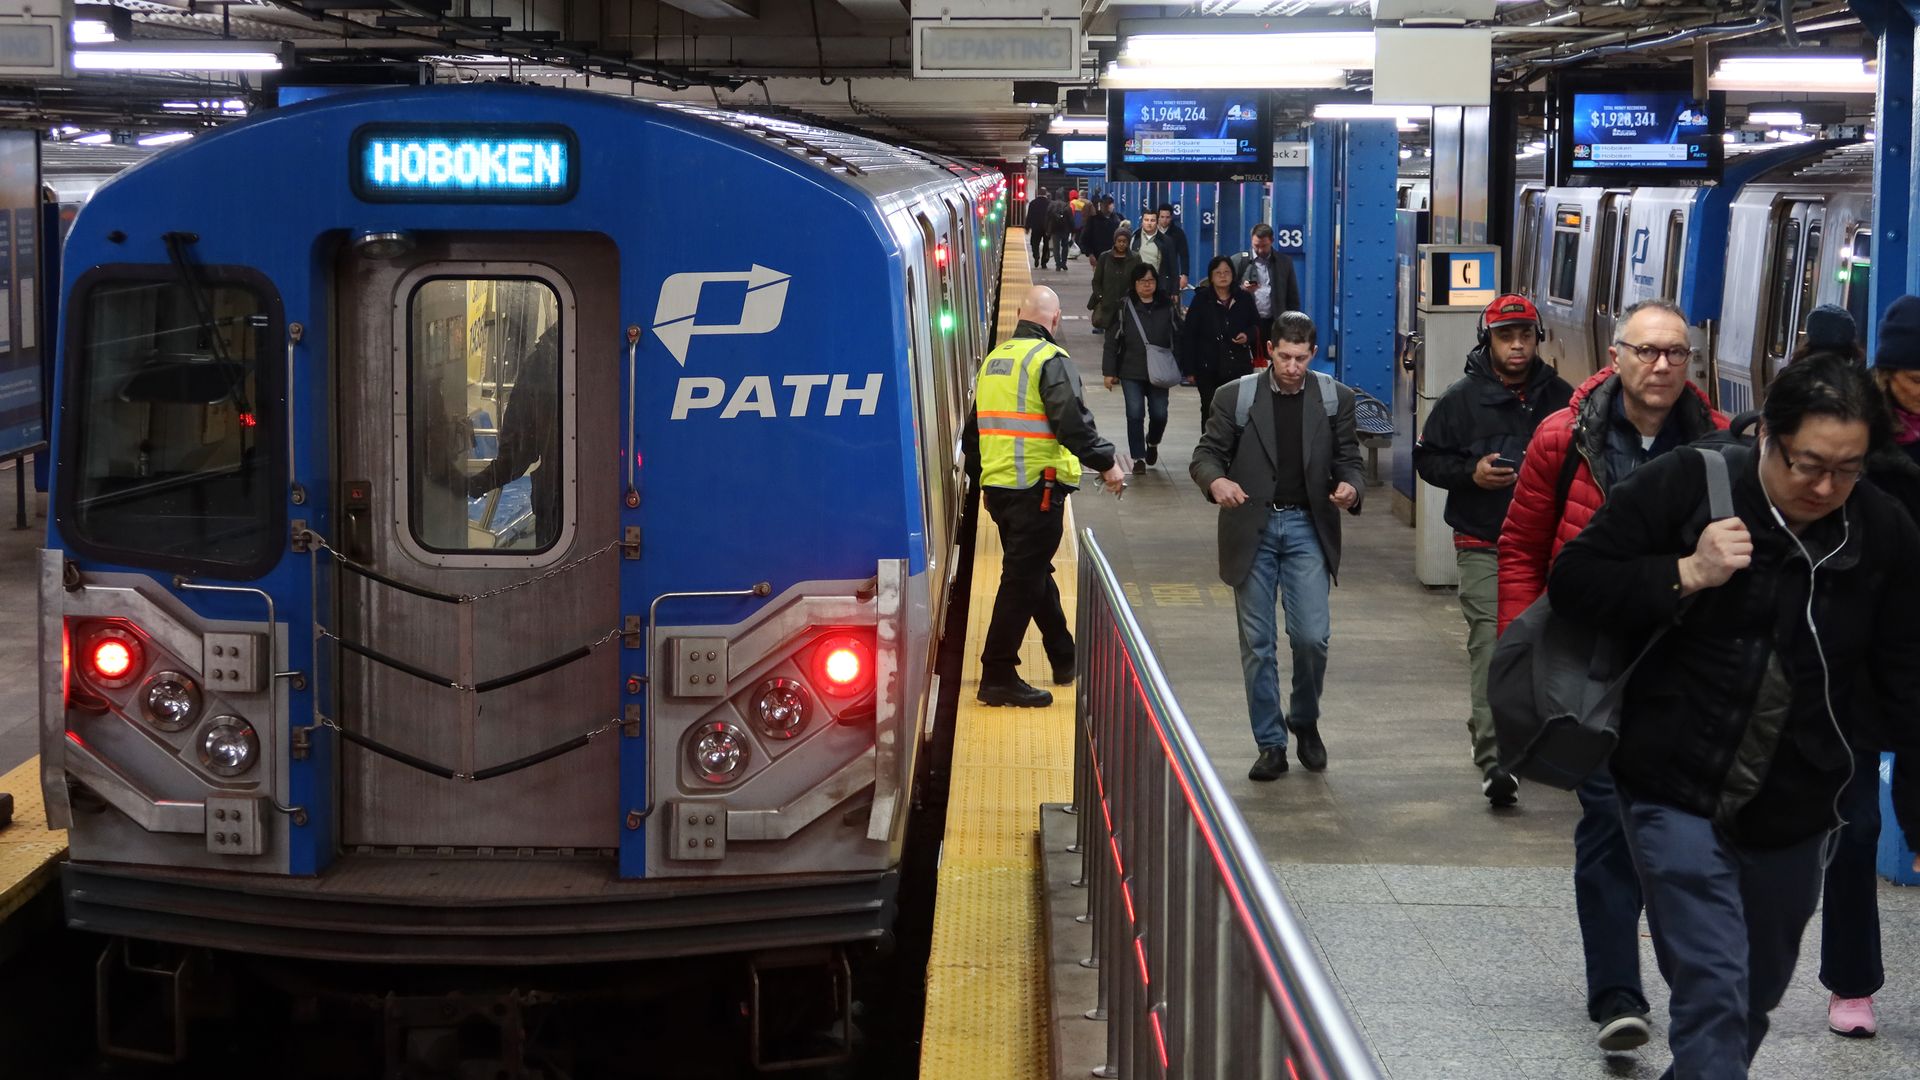 A PATH train arrives at the 33rd Street Station from Hoboken, New Jersey during rush hour on March 12